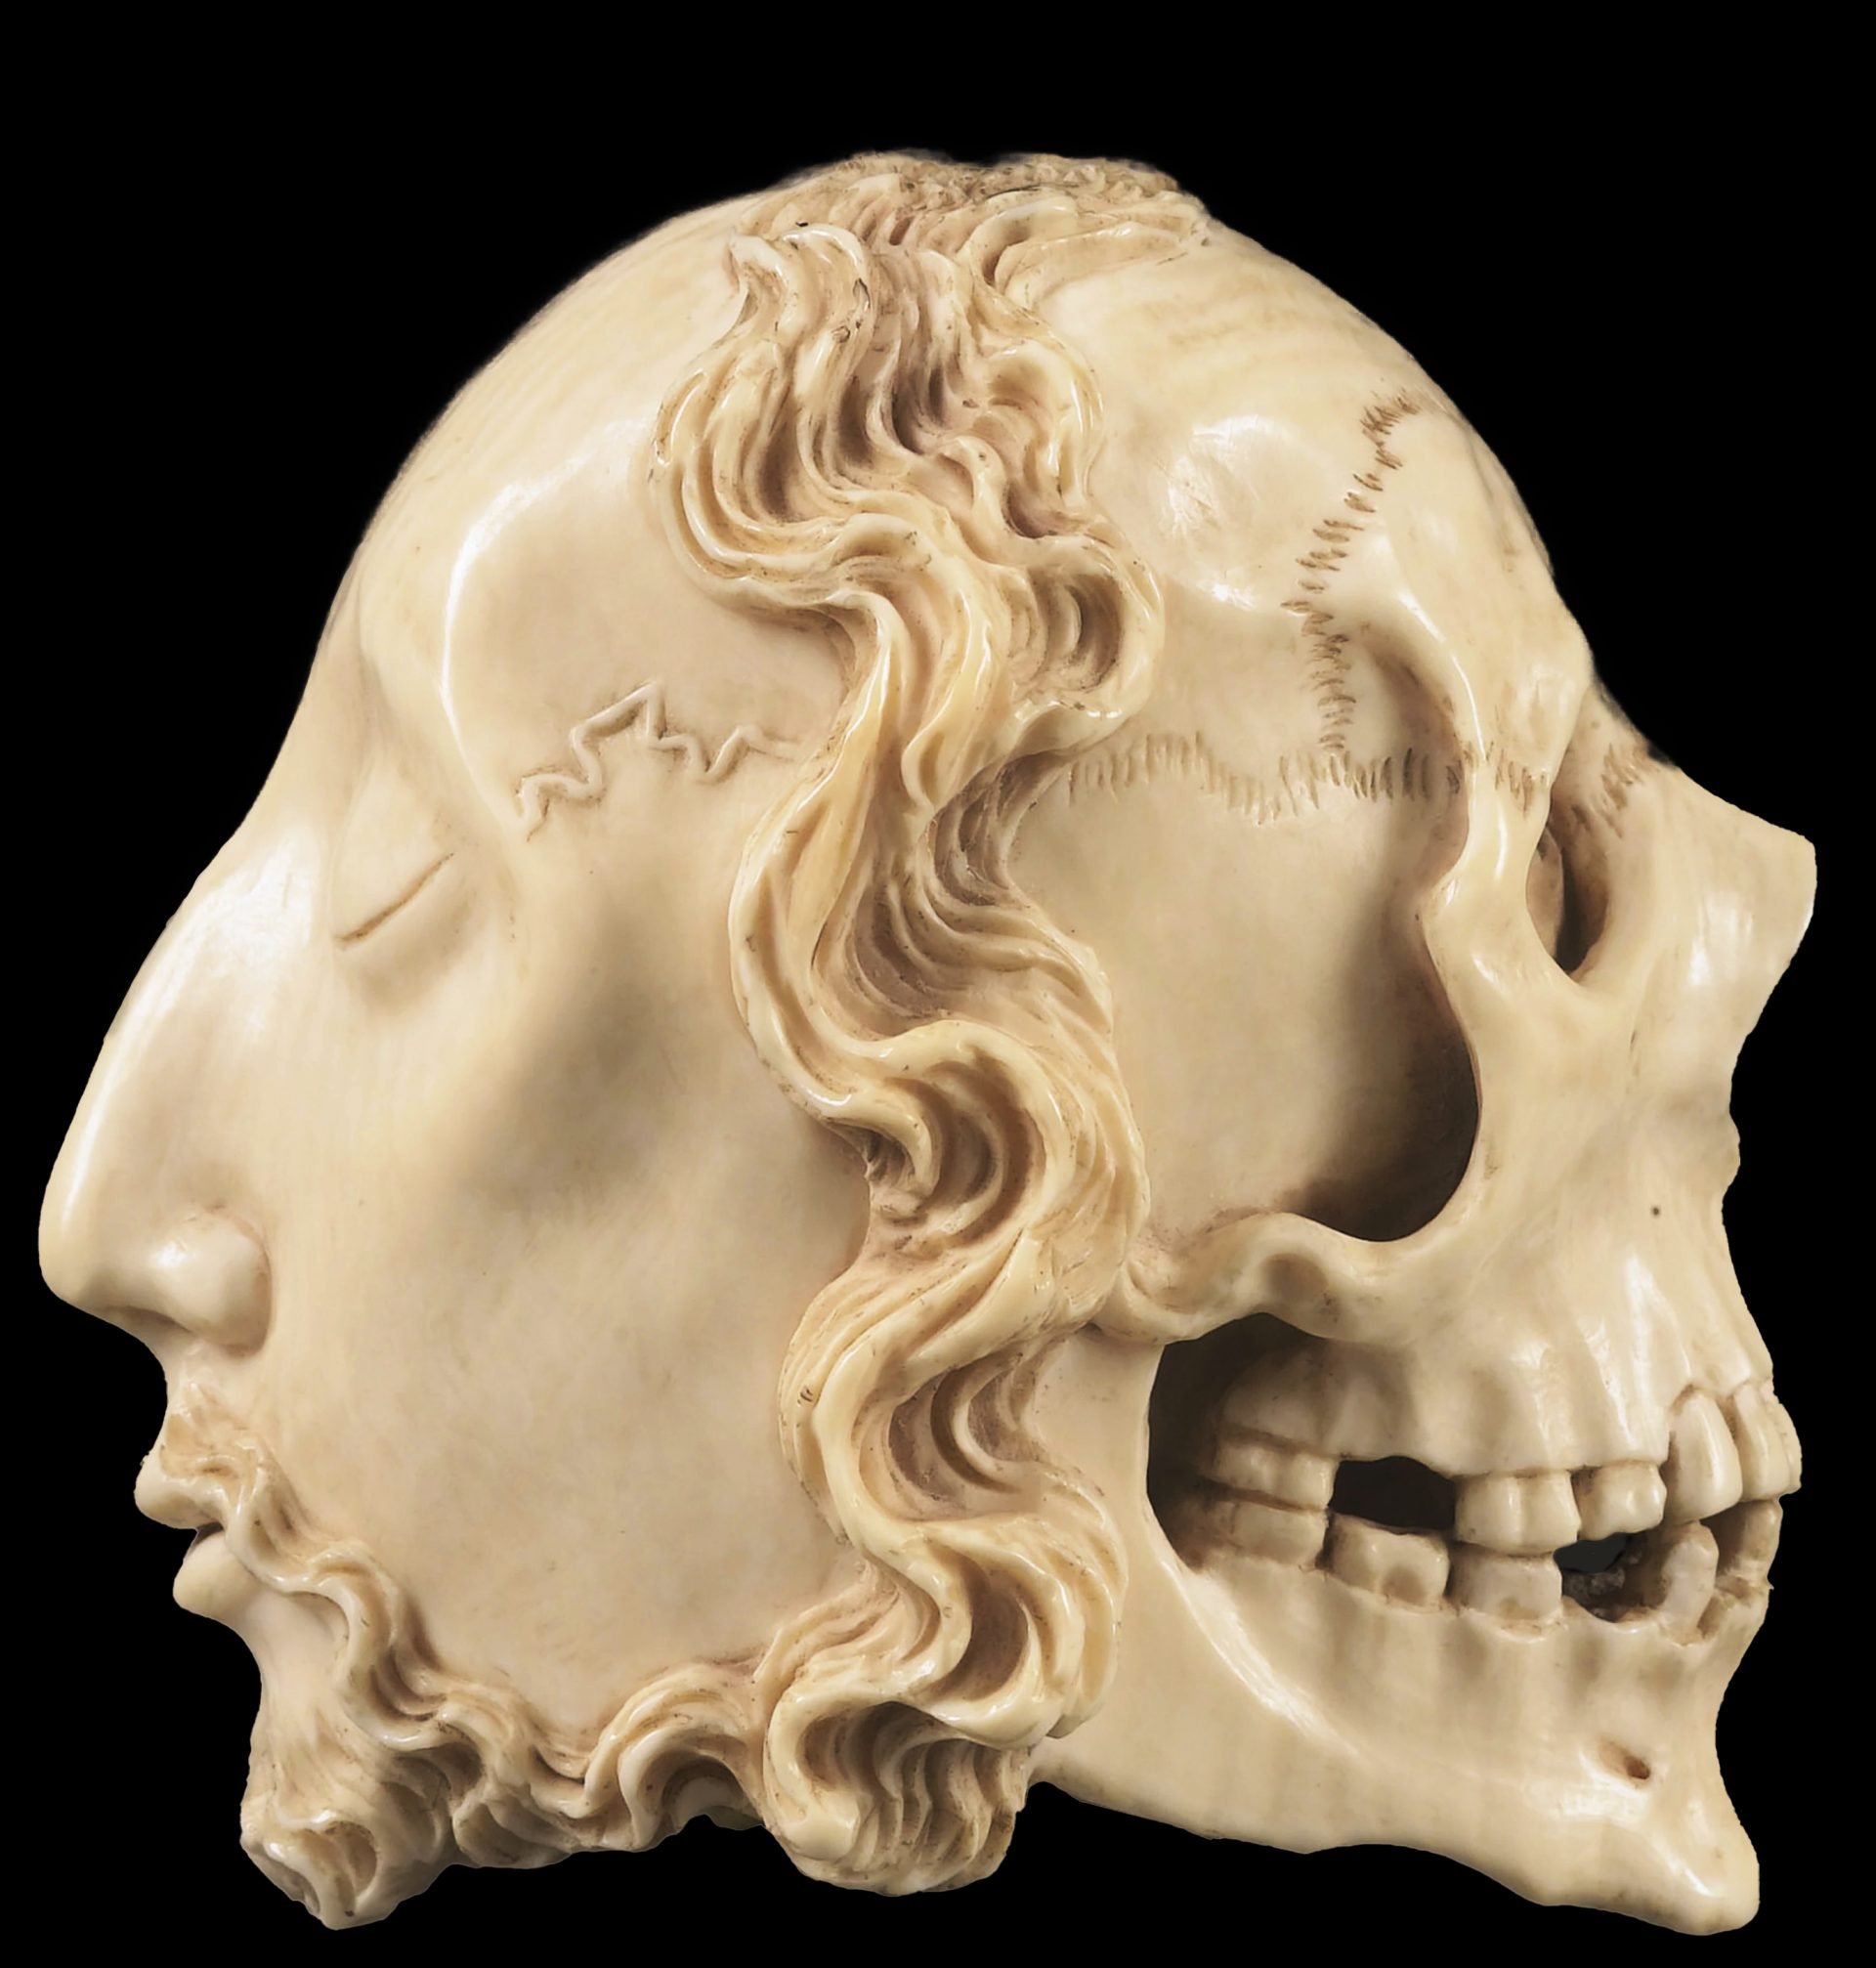 Double-sided Memento Mori features a male face with closed eyes on one side, and a death's skull on the other.